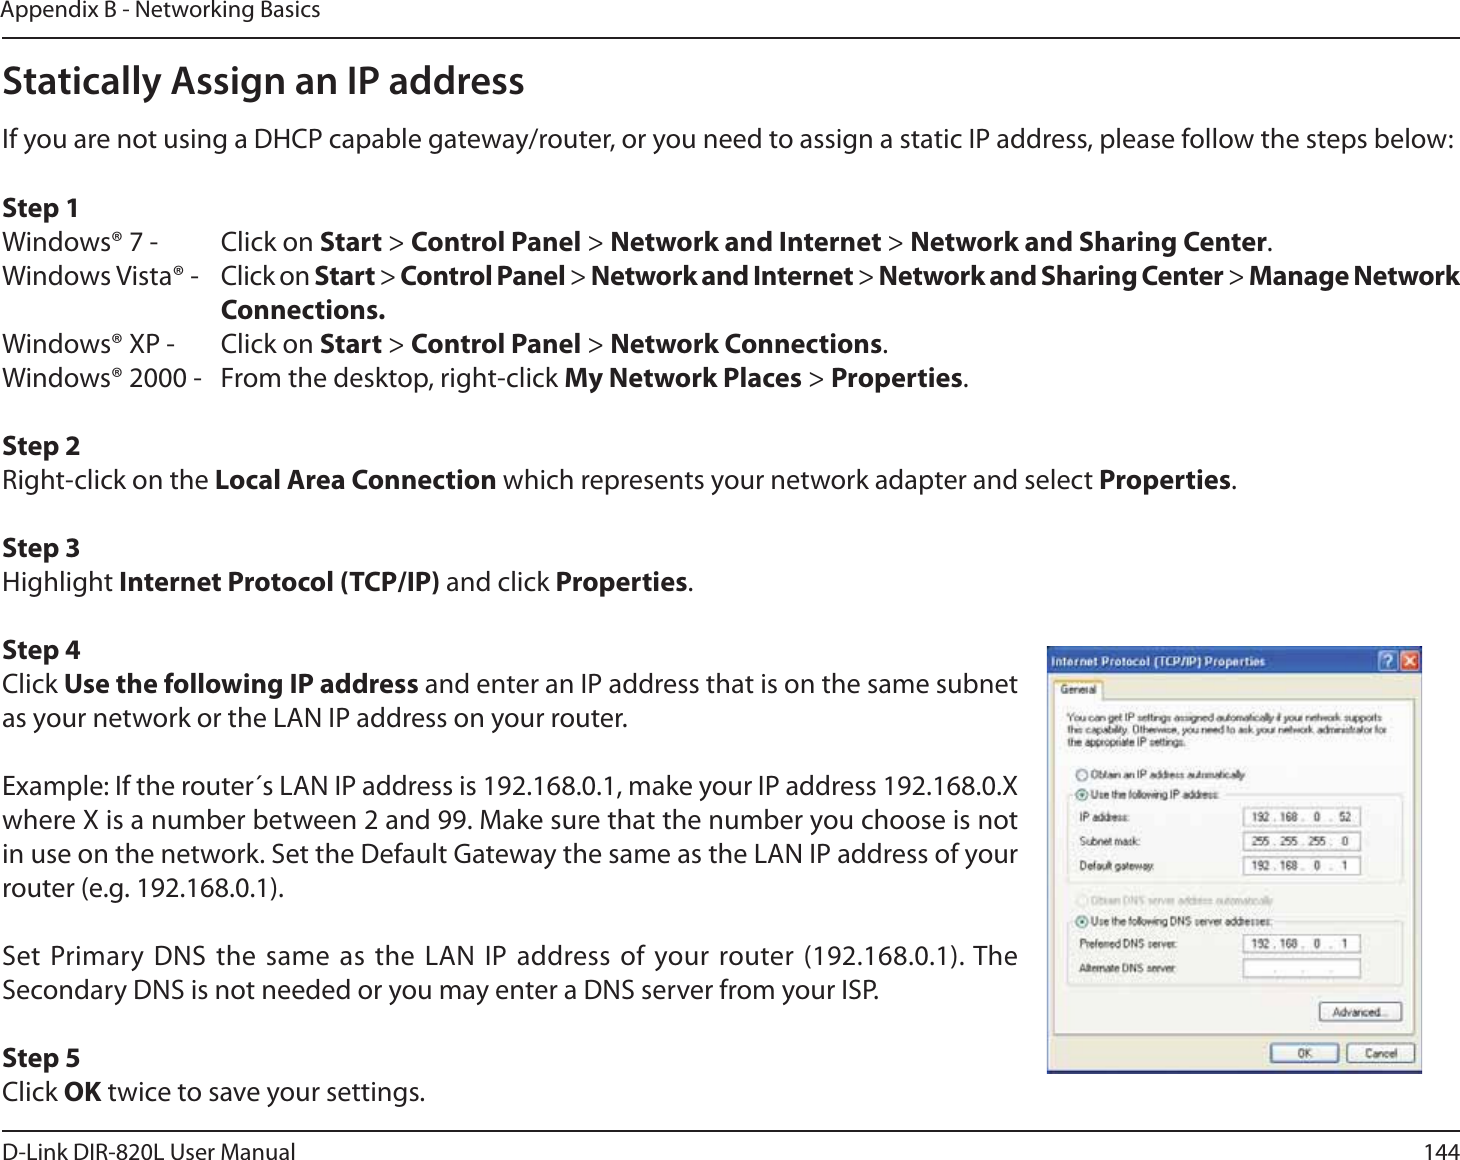 144D-Link DIR-820L User ManualAppendix B - Networking BasicsStatically Assign an IP addressIf you are not using a DHCP capable gateway/router, or you need to assign a static IP address, please follow the steps below:Step 1Windows® 7 -  Click on Start &gt; Control Panel &gt; Network and Internet &gt; Network and Sharing Center.Windows Vista® -  Click on Start &gt; Control Panel &gt; Network and Internet &gt; Network and Sharing Center &gt; Manage Network     Connections.Windows® XP -  Click on Start &gt; Control Panel &gt; Network Connections.Windows® 2000 -  From the desktop, right-click My Network Places &gt; Properties.Step 2Right-click on the Local Area Connection which represents your network adapter and select Properties.Step 3Highlight Internet Protocol (TCP/IP) and click Properties.Step 4Click Use the following IP address and enter an IP address that is on the same subnet as your network or the LAN IP address on your router. Example: If the router´s LAN IP address is 192.168.0.1, make your IP address 192.168.0.X where X is a number between 2 and 99. Make sure that the number you choose is not in use on the network. Set the Default Gateway the same as the LAN IP address of your router (e.g. 192.168.0.1). Set Primary DNS the same as the LAN IP address of your router (192.168.0.1). The Secondary DNS is not needed or you may enter a DNS server from your ISP.Step 5Click OK twice to save your settings.